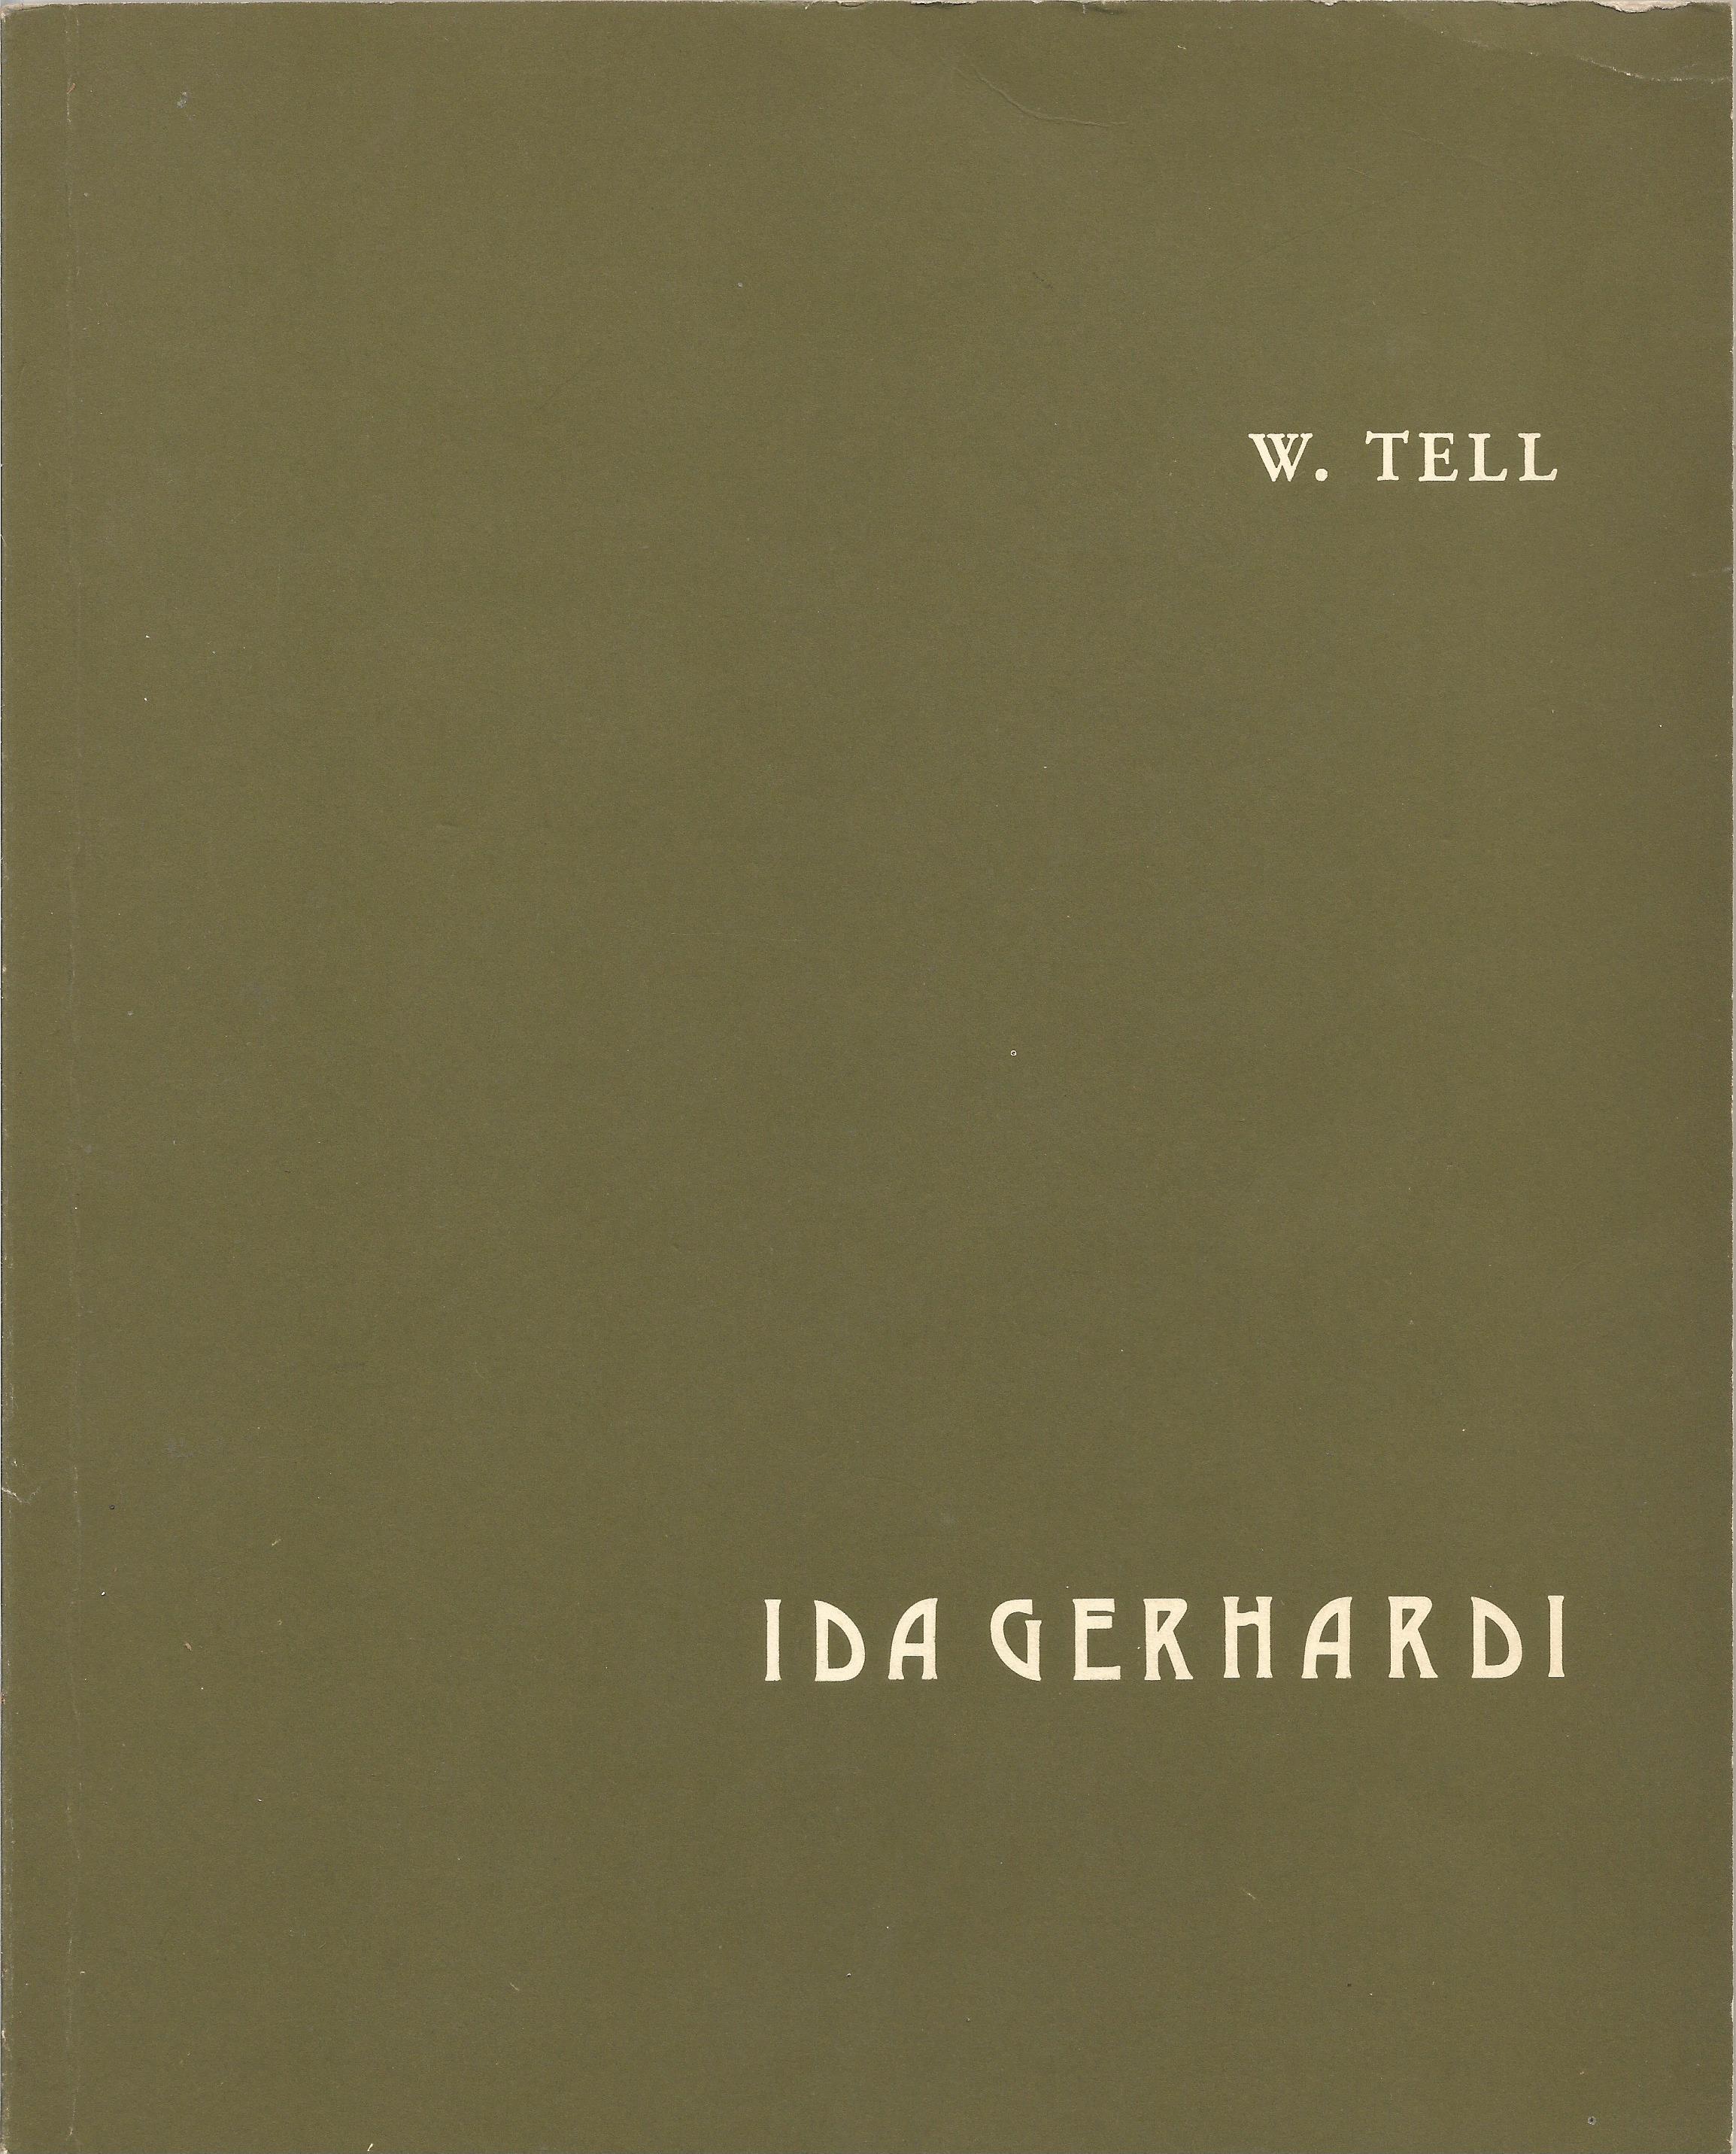 Signed Softback Book W. Tell by Ida Gerhardi 1977 with a dedication on the first page good